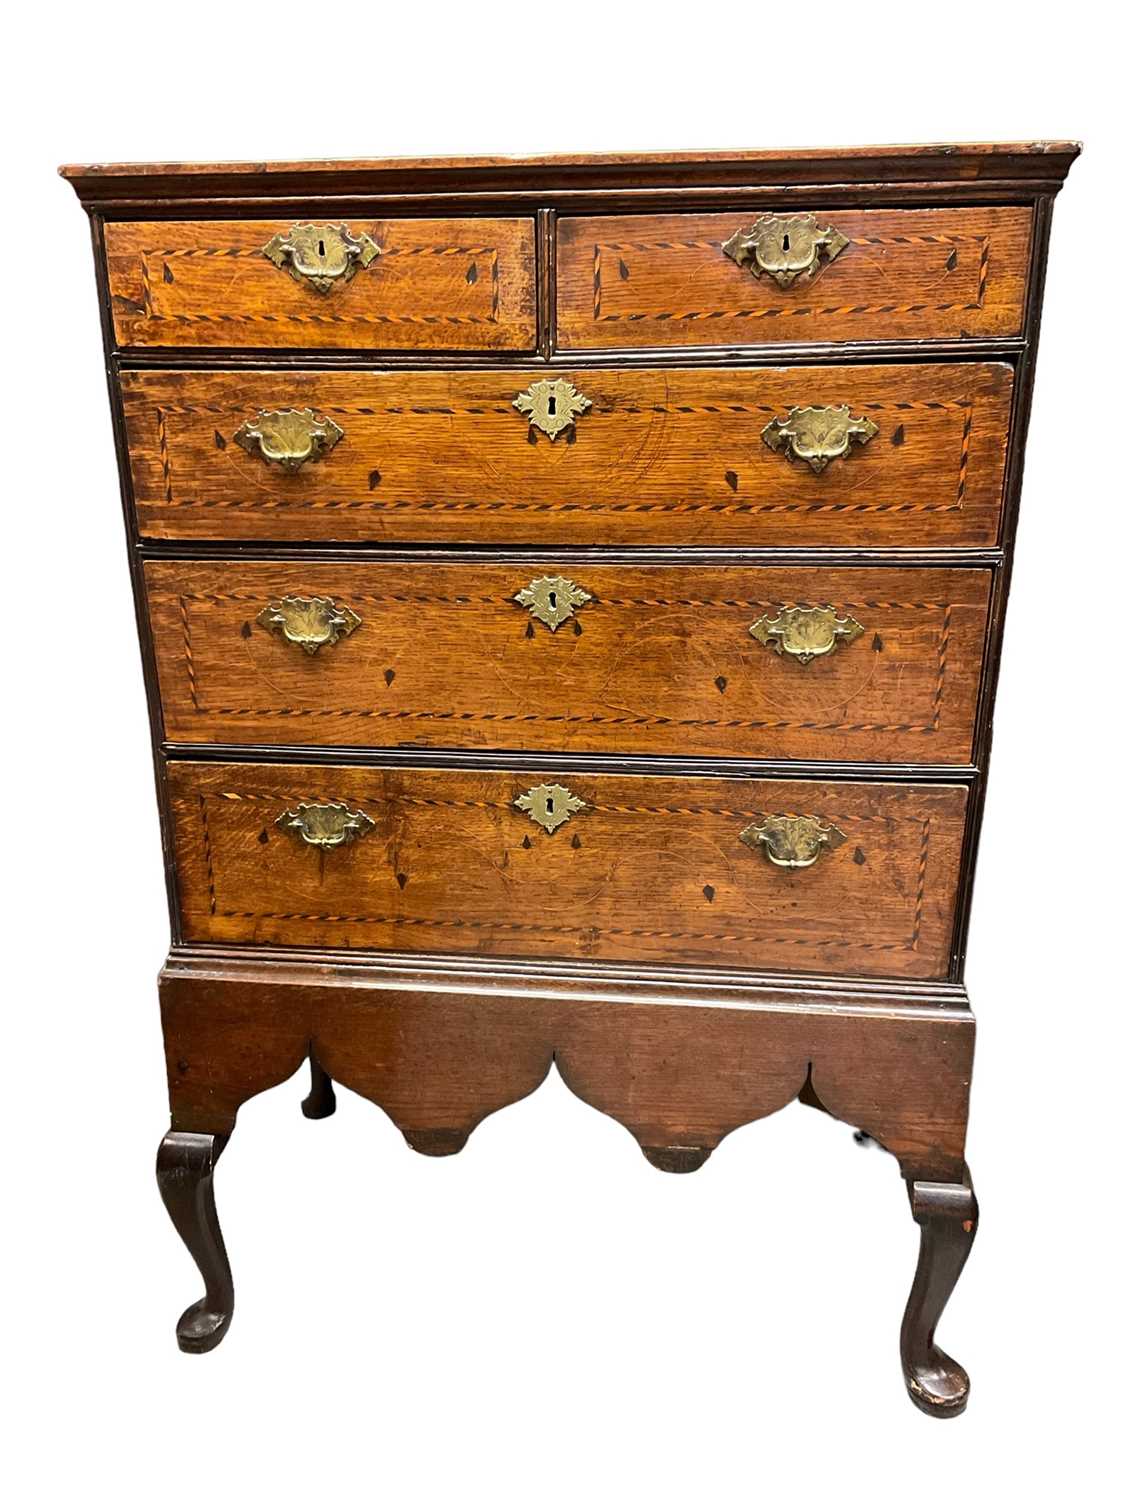 Early 18th century oak and barber pole strung chest on integral stand.